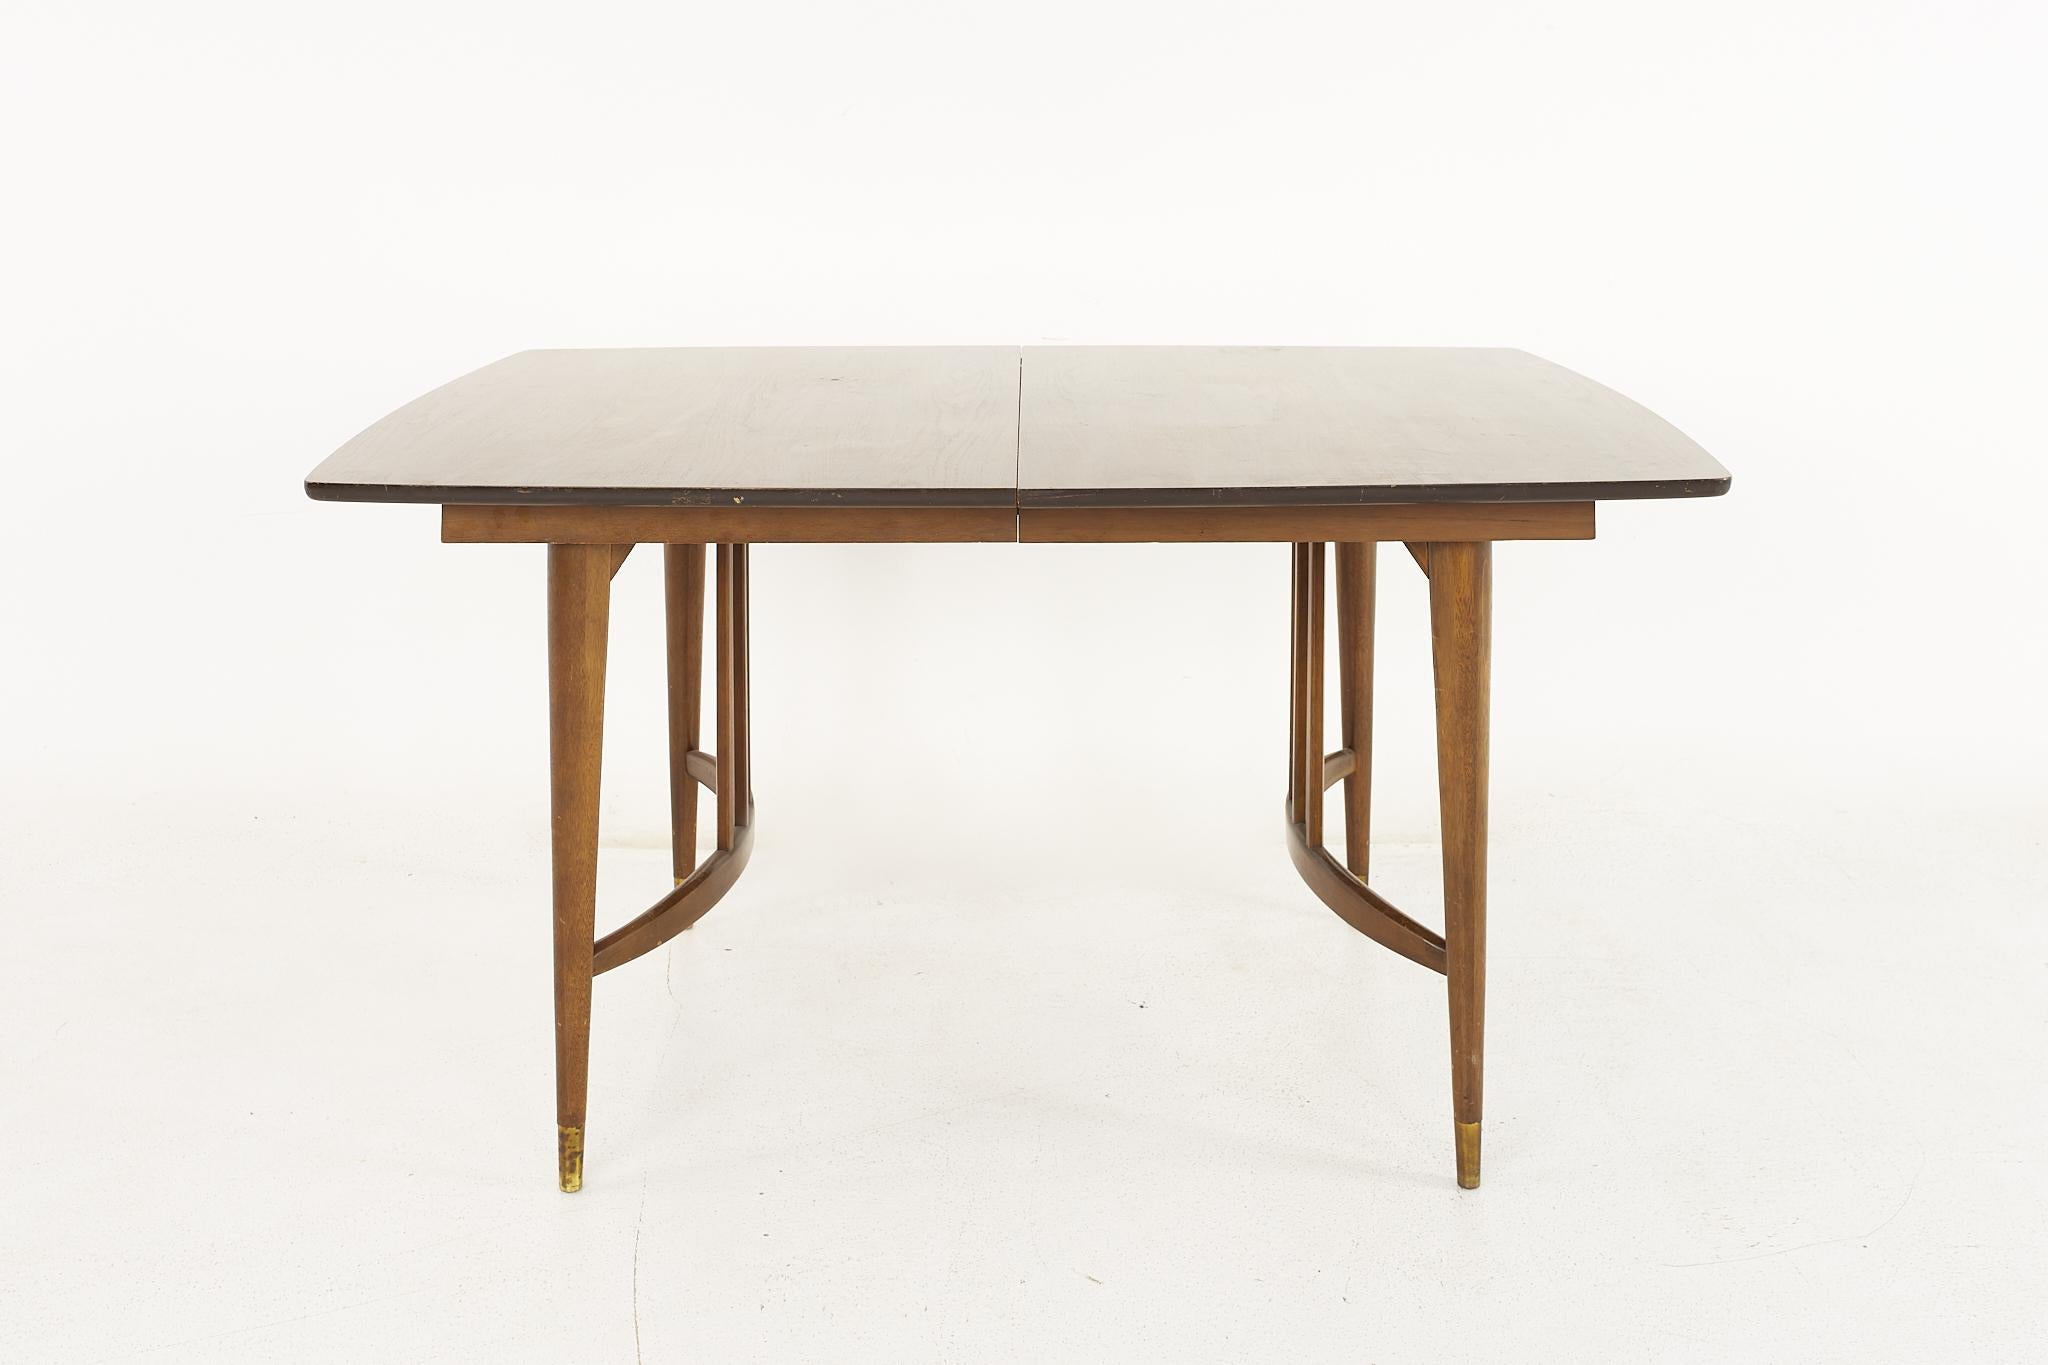 Drexel Mid Century Walnut Expanding Dining Table with 2 Leaves

The table measures: 57.5 wide x 40 deep x 29.5 inches high; each leaf is 12 inches wide, making a maximum table width of 81.5 inches when both leaves are used

All pieces of furniture